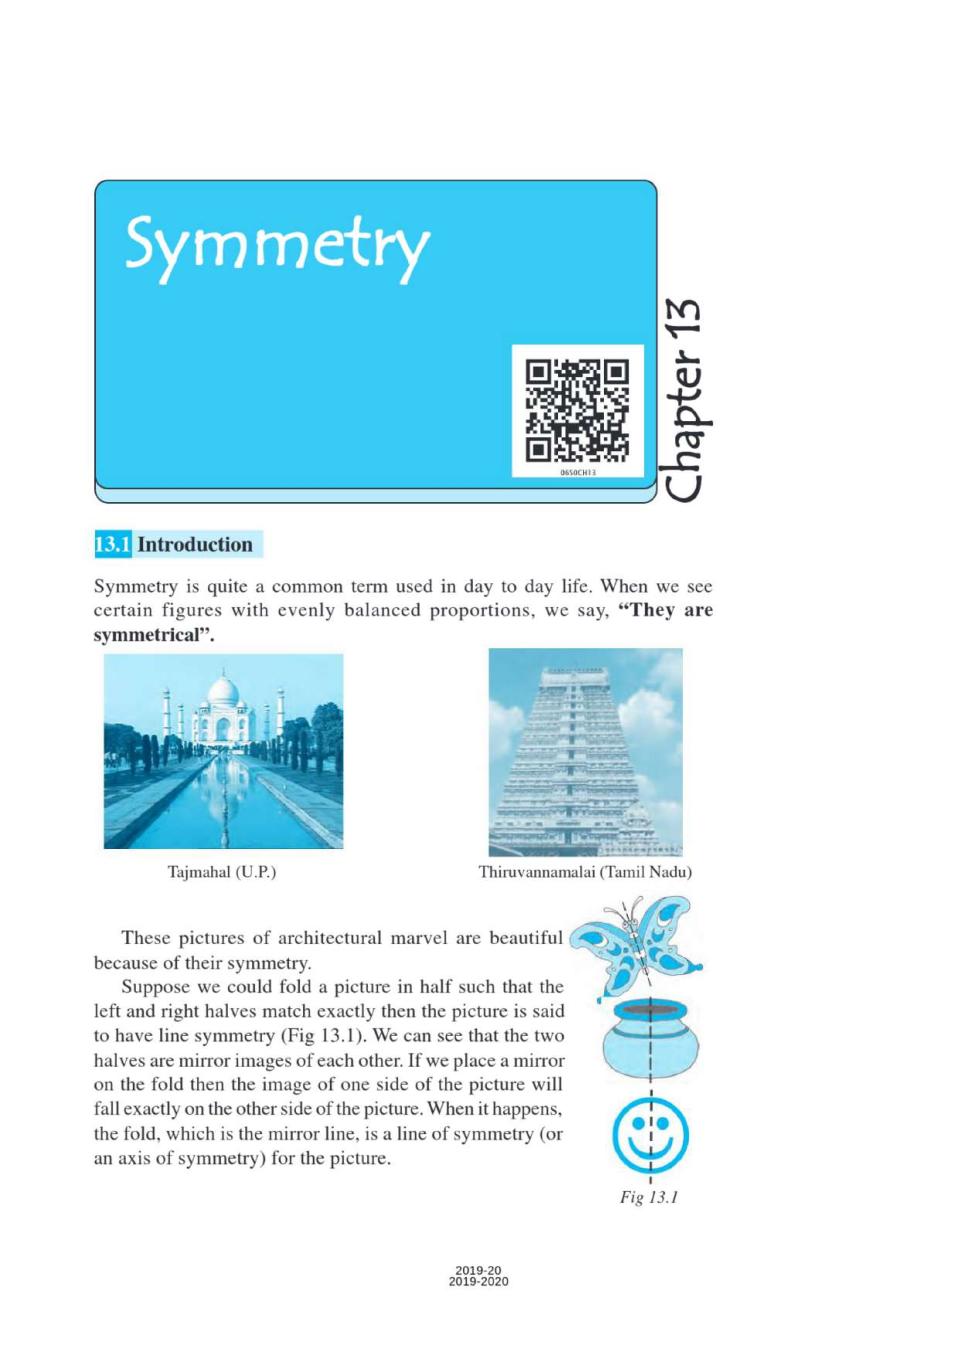 NCERT Book Class 6 Maths Old Book Chapter Symmetry - Page 1